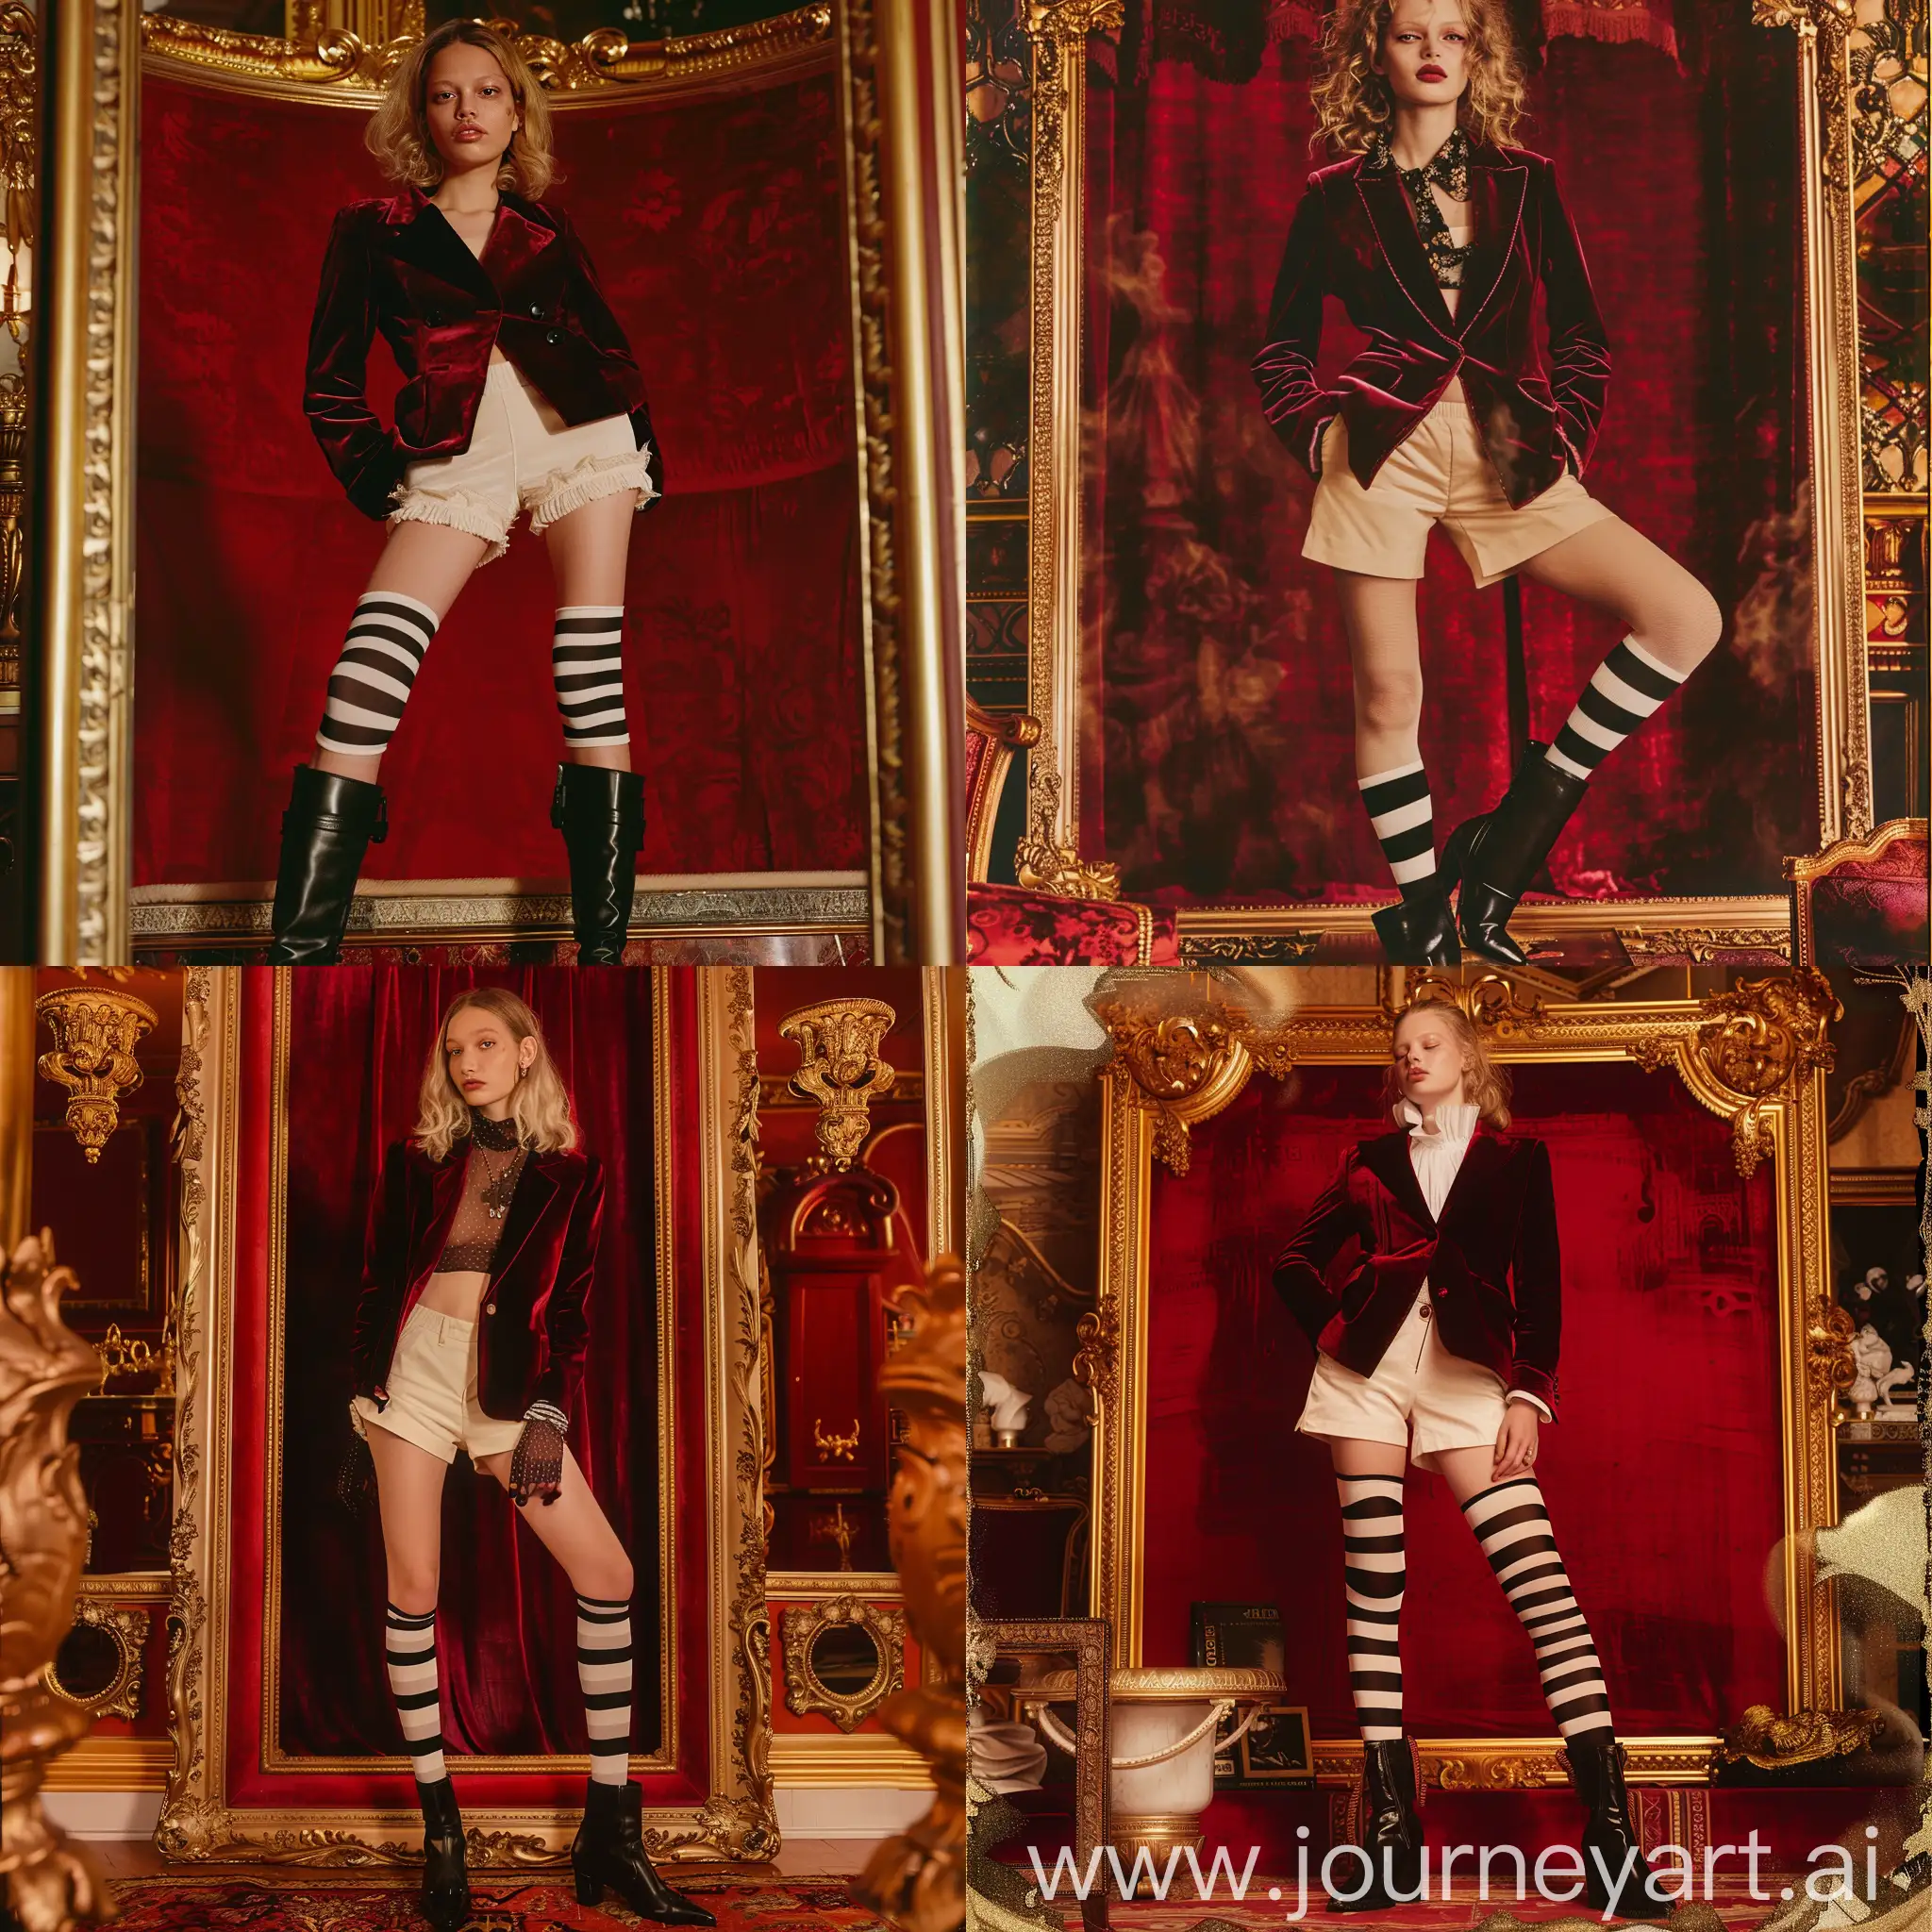 35mm photo of an editorial fashion shoot, featuring a model of caucasian ethnicity with an elegant pose and alabaster complexion. The model wears a crimson velvet blazer, ivory high-waisted shorts, and black and white striped stockings, complemented with chic black leather ankle boots. The scene is set in an opulent room with a vintage red velvet backdrop and an ornate golden frame, all bathed in rich, warm lighting that highlights a sense of classic sophistication. This is melded with an editorial fashion illustration overlay for an artistic touch